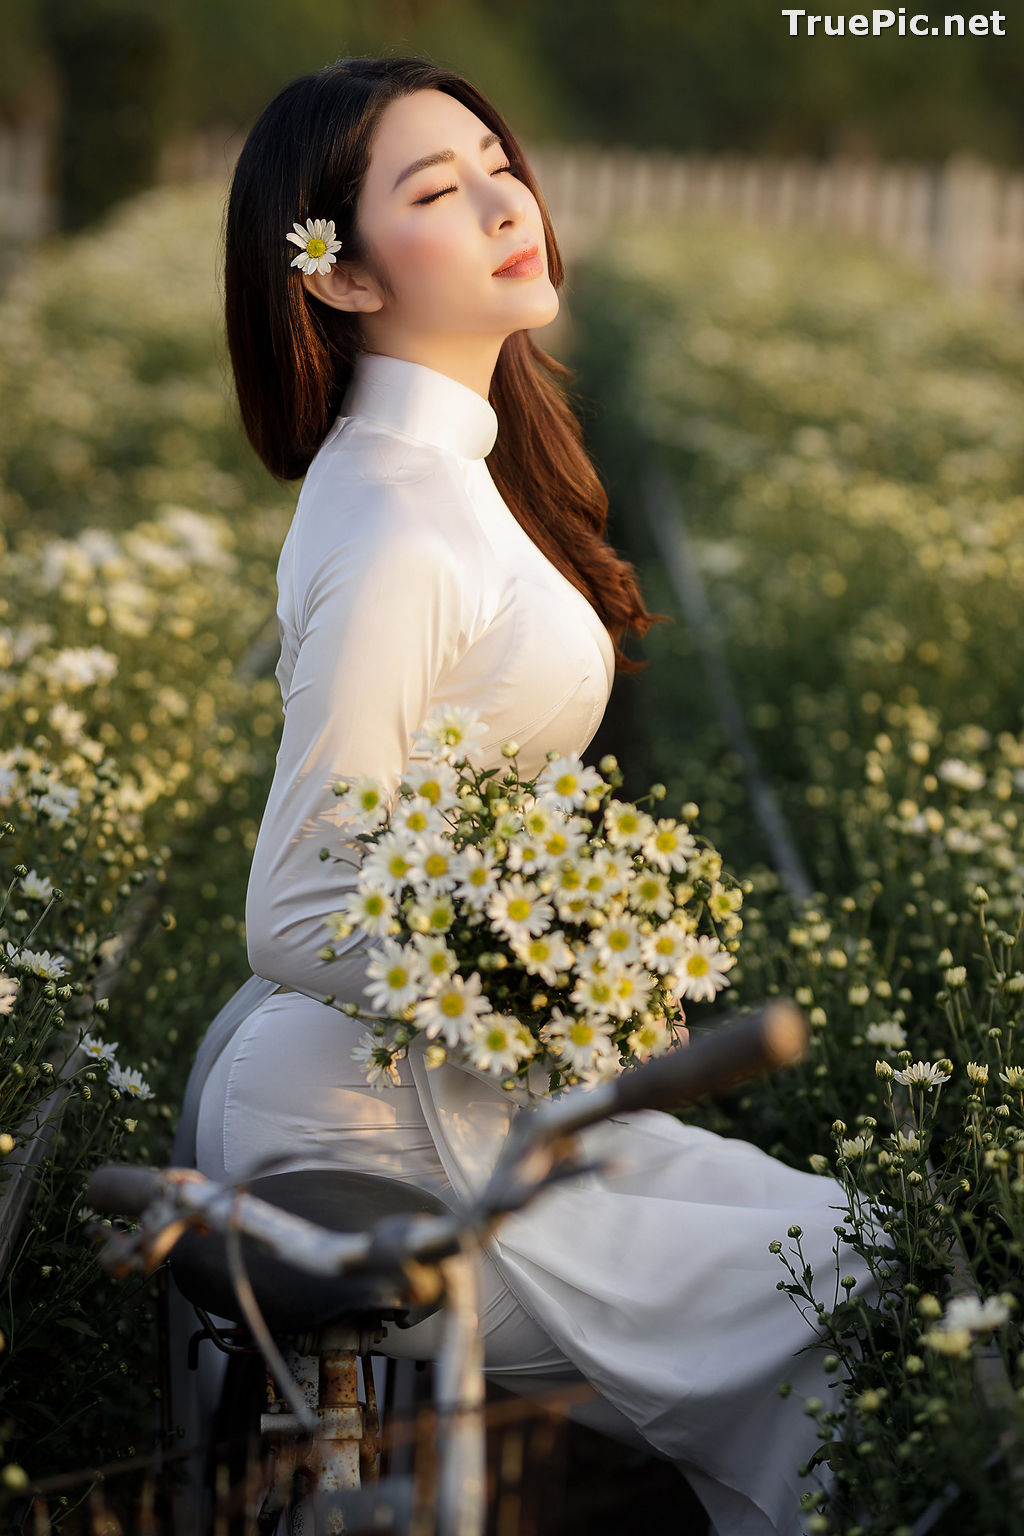 Image The Beauty of Vietnamese Girls with Traditional Dress (Ao Dai) #5 - TruePic.net - Picture-22